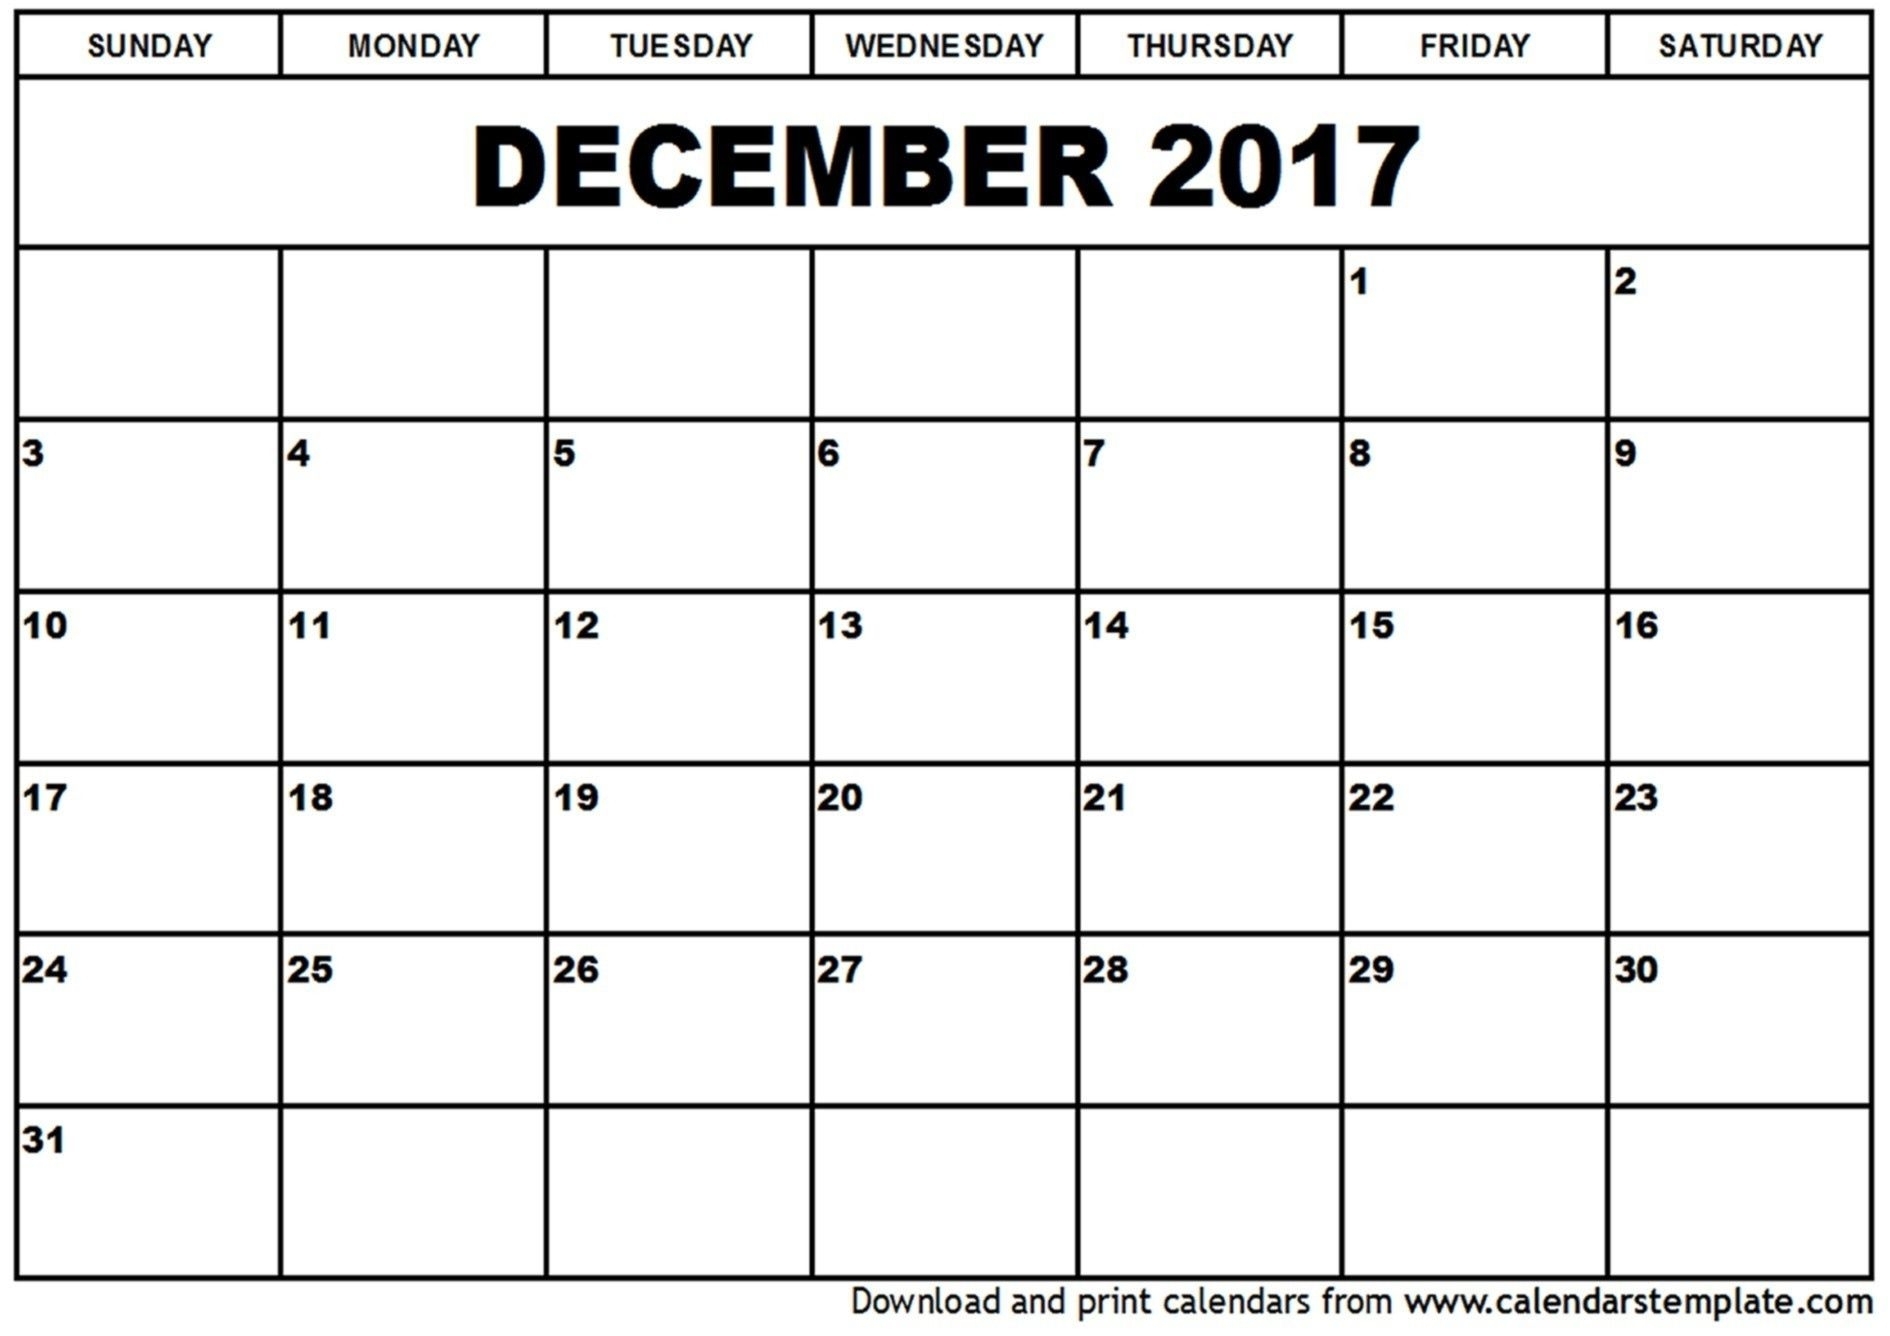 Monthly Calendar You Can Type In In 2020 | Free Calendar